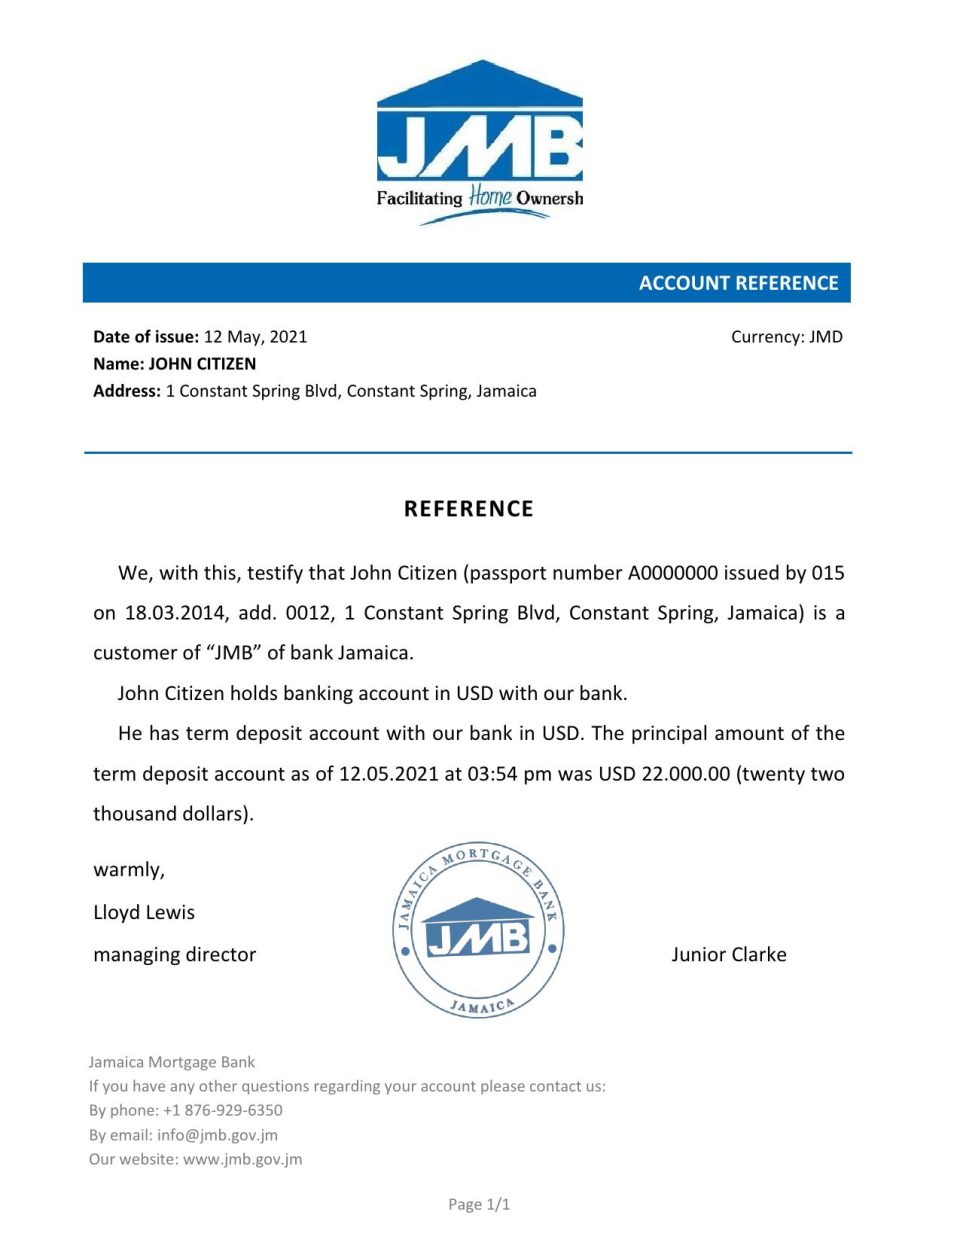 Download Jamaica Mortgage Bank Reference Letter Templates | Editable Word